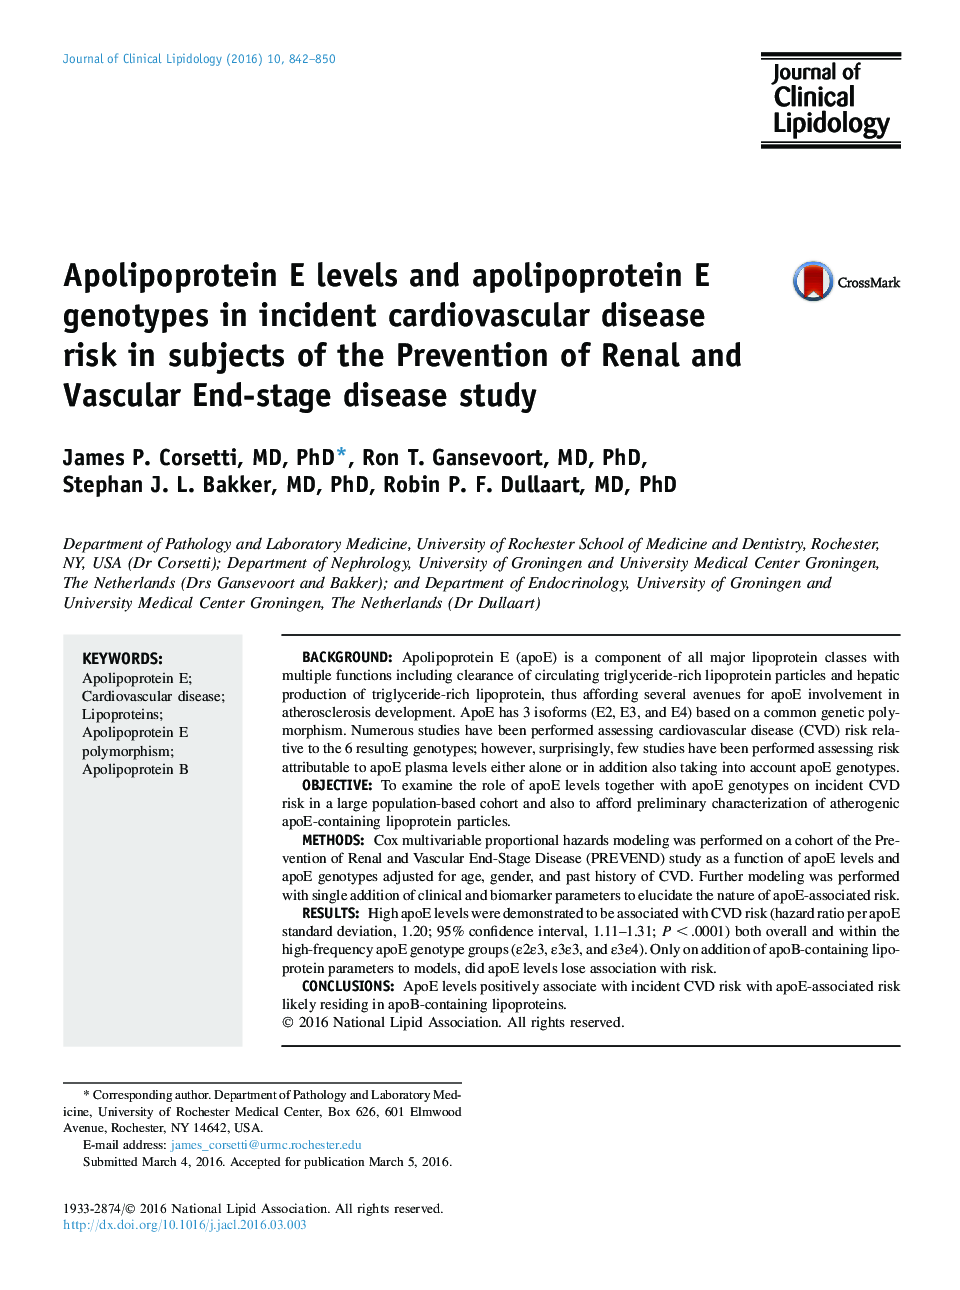 Original ArticleApolipoprotein E levels and apolipoprotein E genotypes in incident cardiovascular disease risk in subjects of the Prevention of Renal and Vascular End-stage disease study